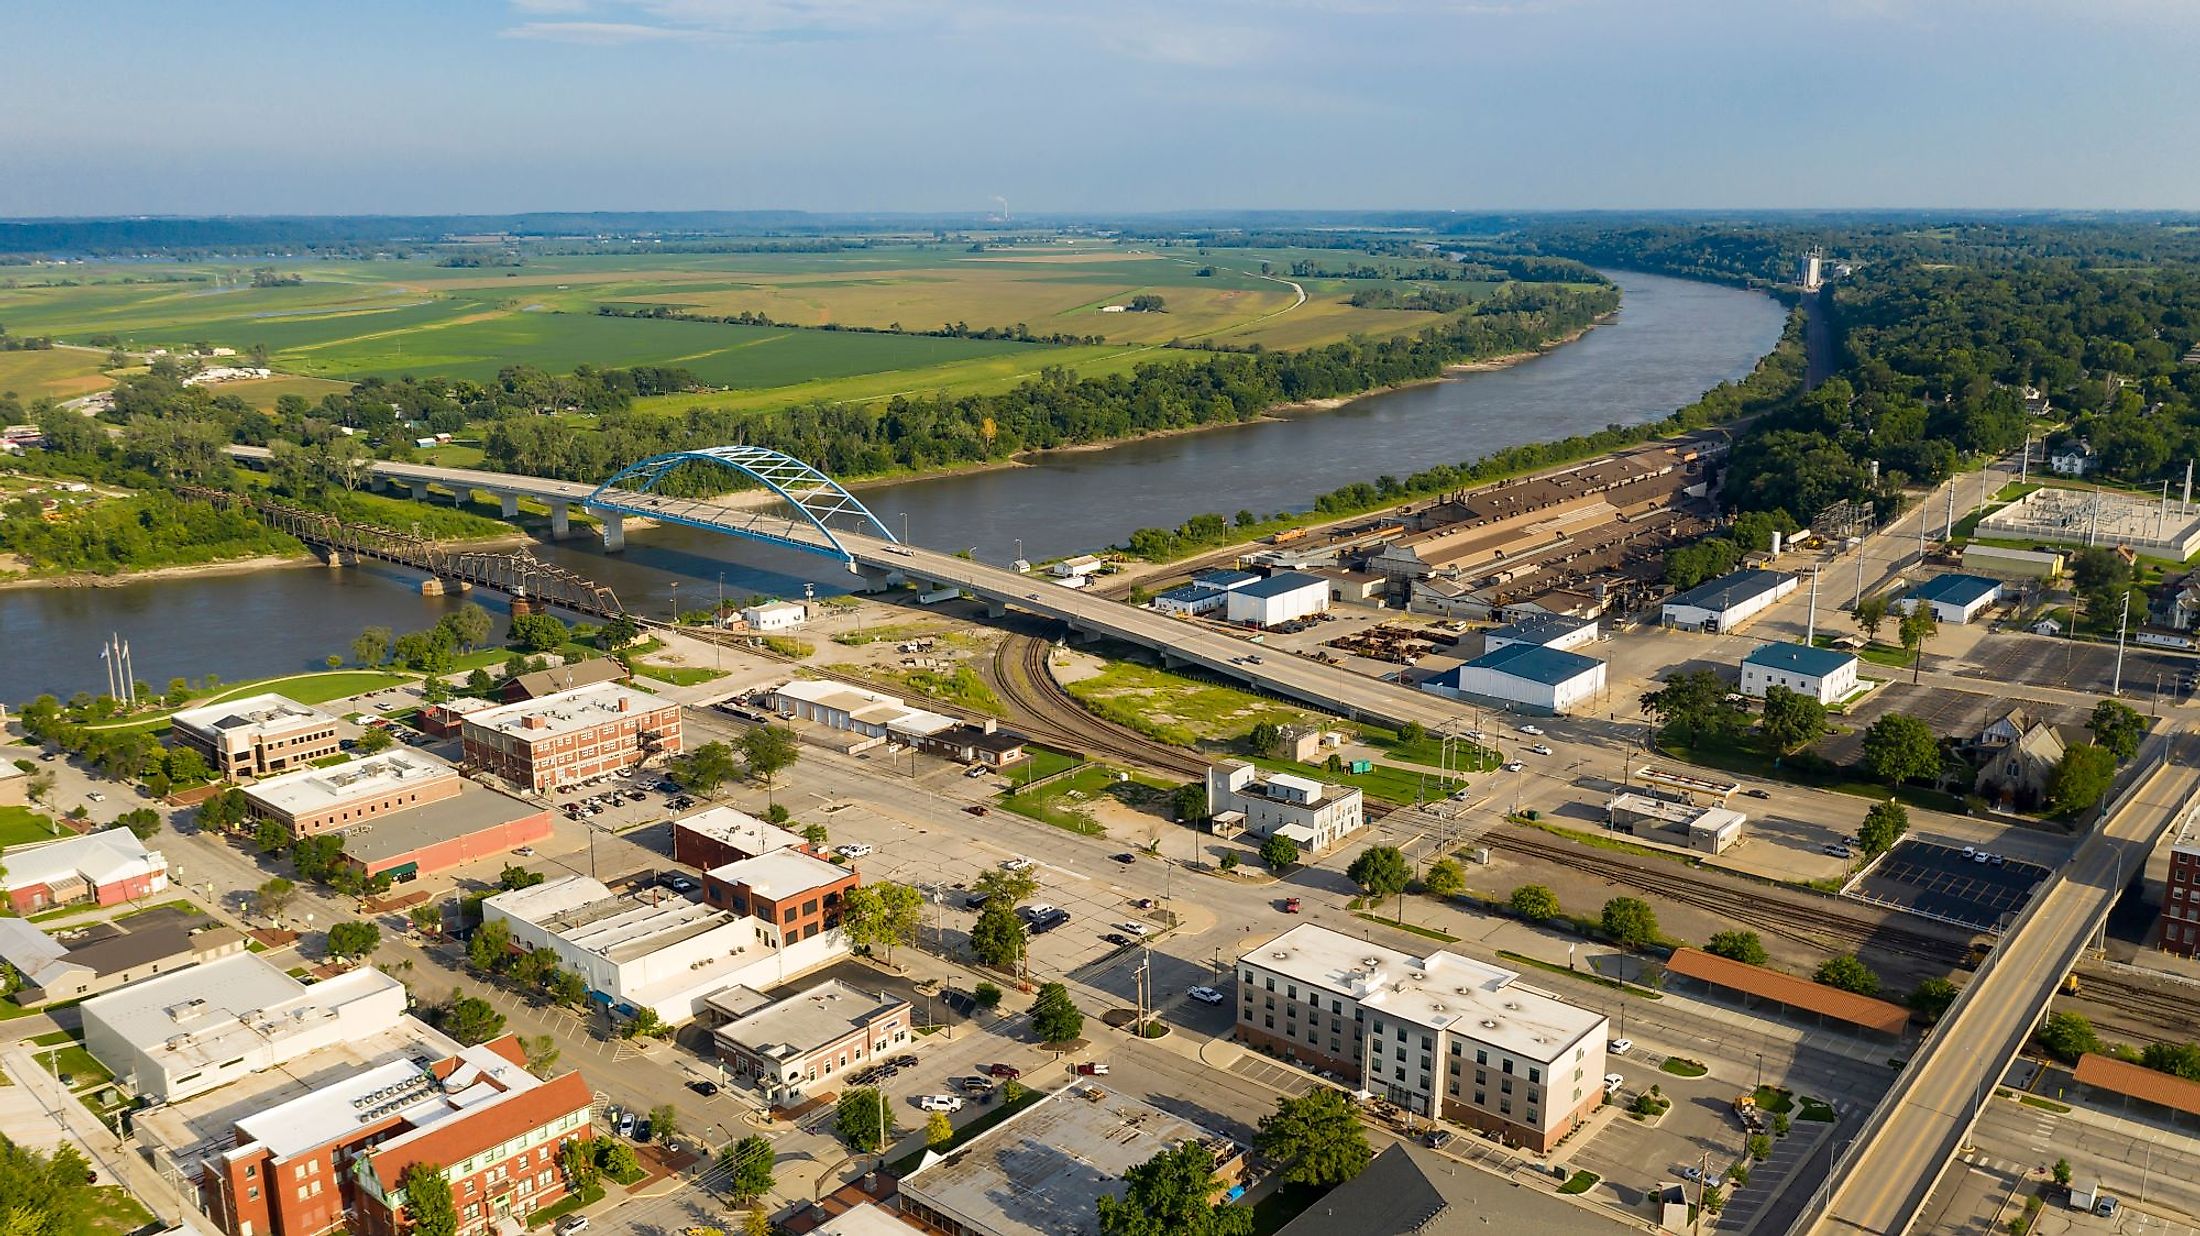 Aerial view over the downtown city center of Atchison, Kansas in the mid-morning light. 